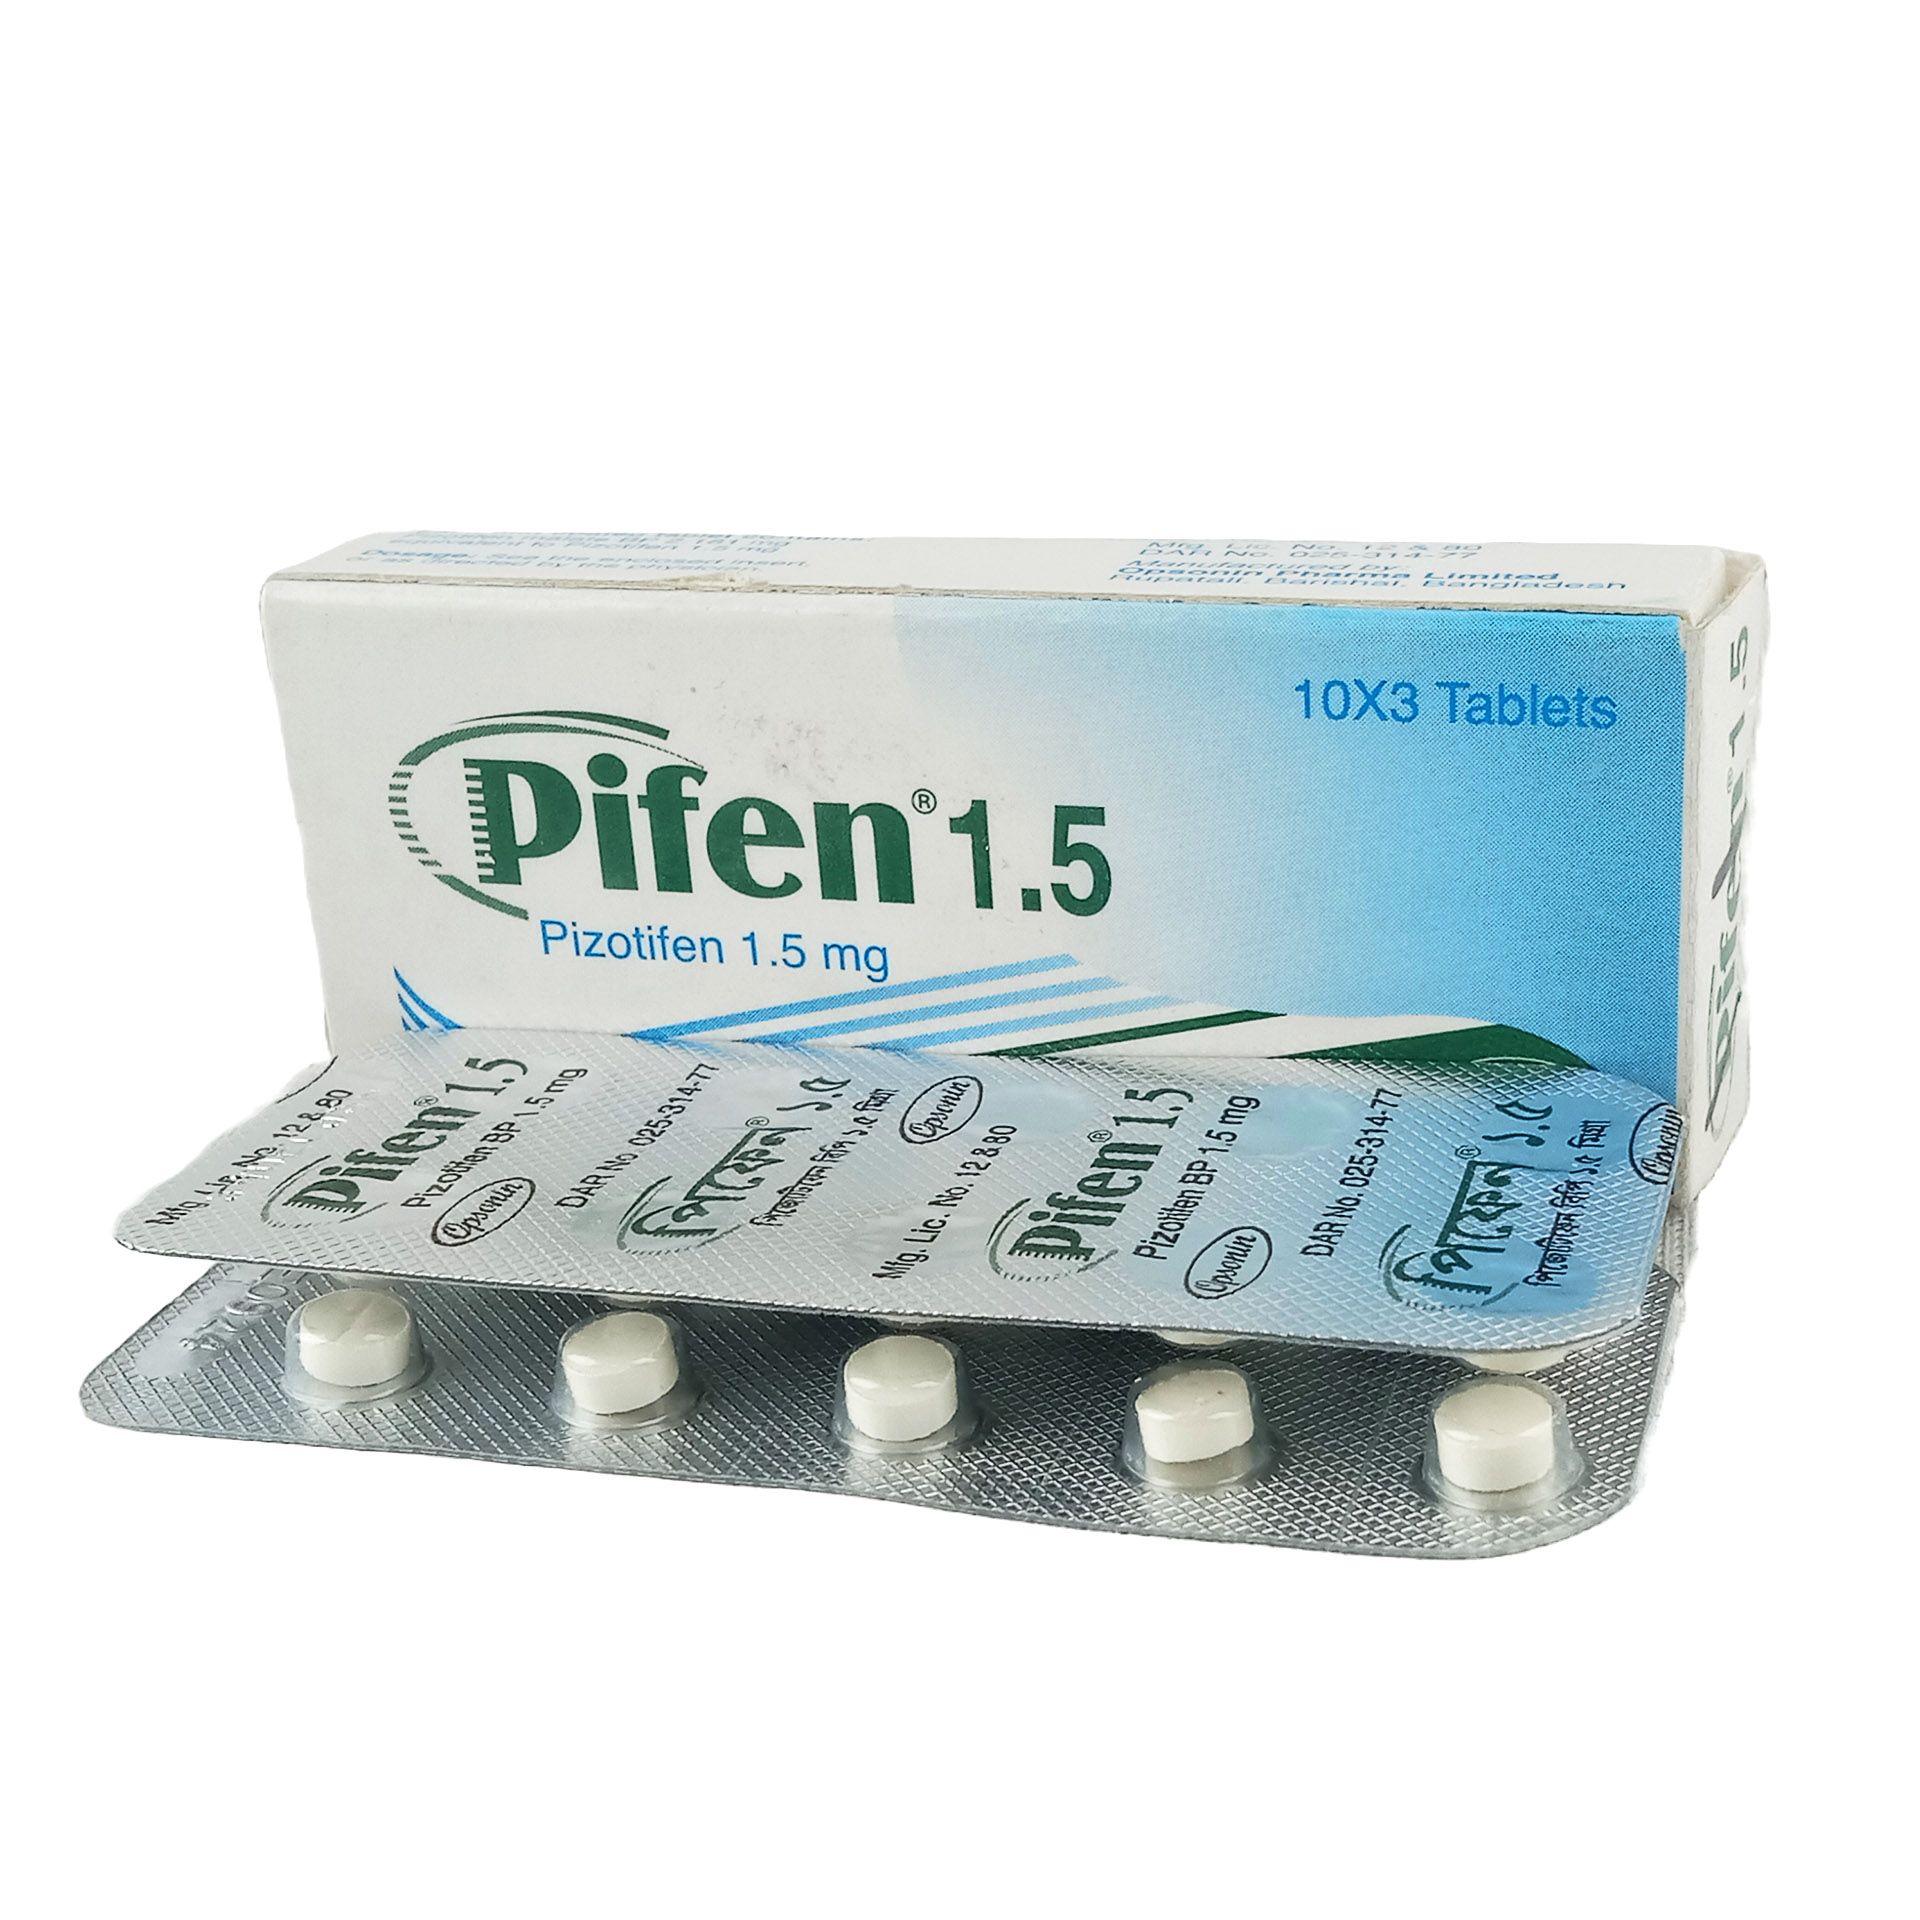 Pifen 1.5 1.5mg Tablet